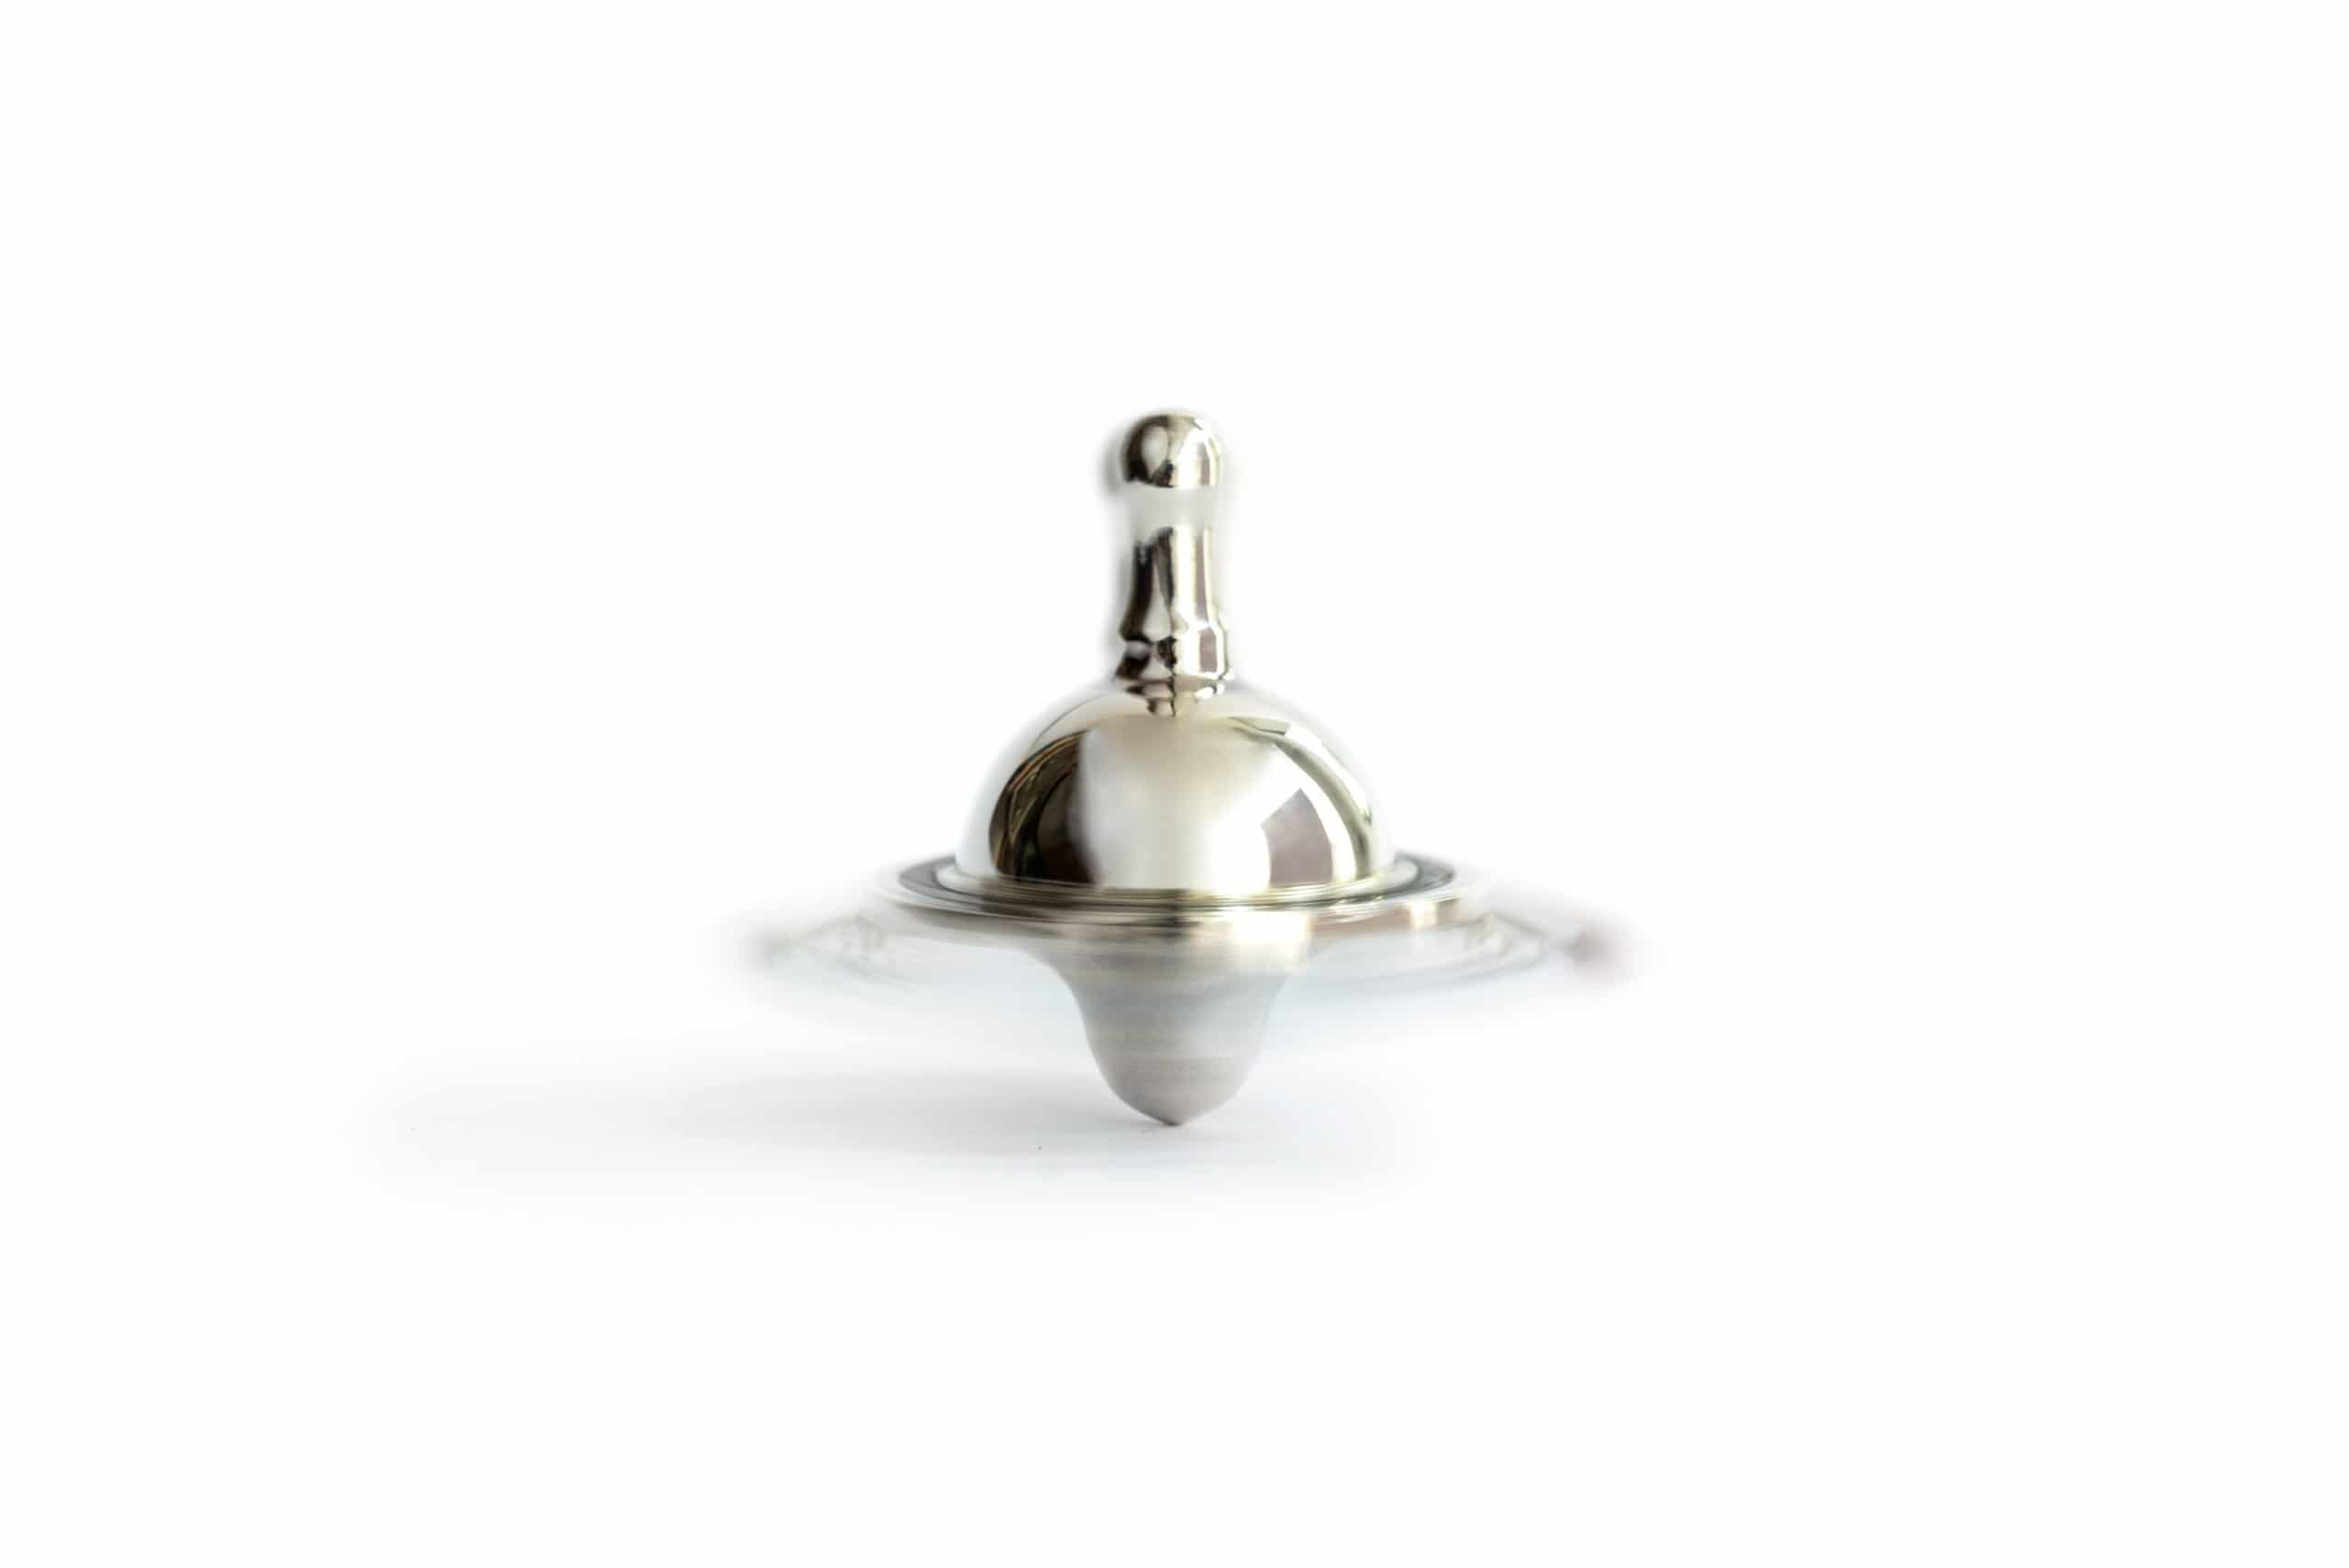 Sterling Silver Dreidel with Crystal Beads